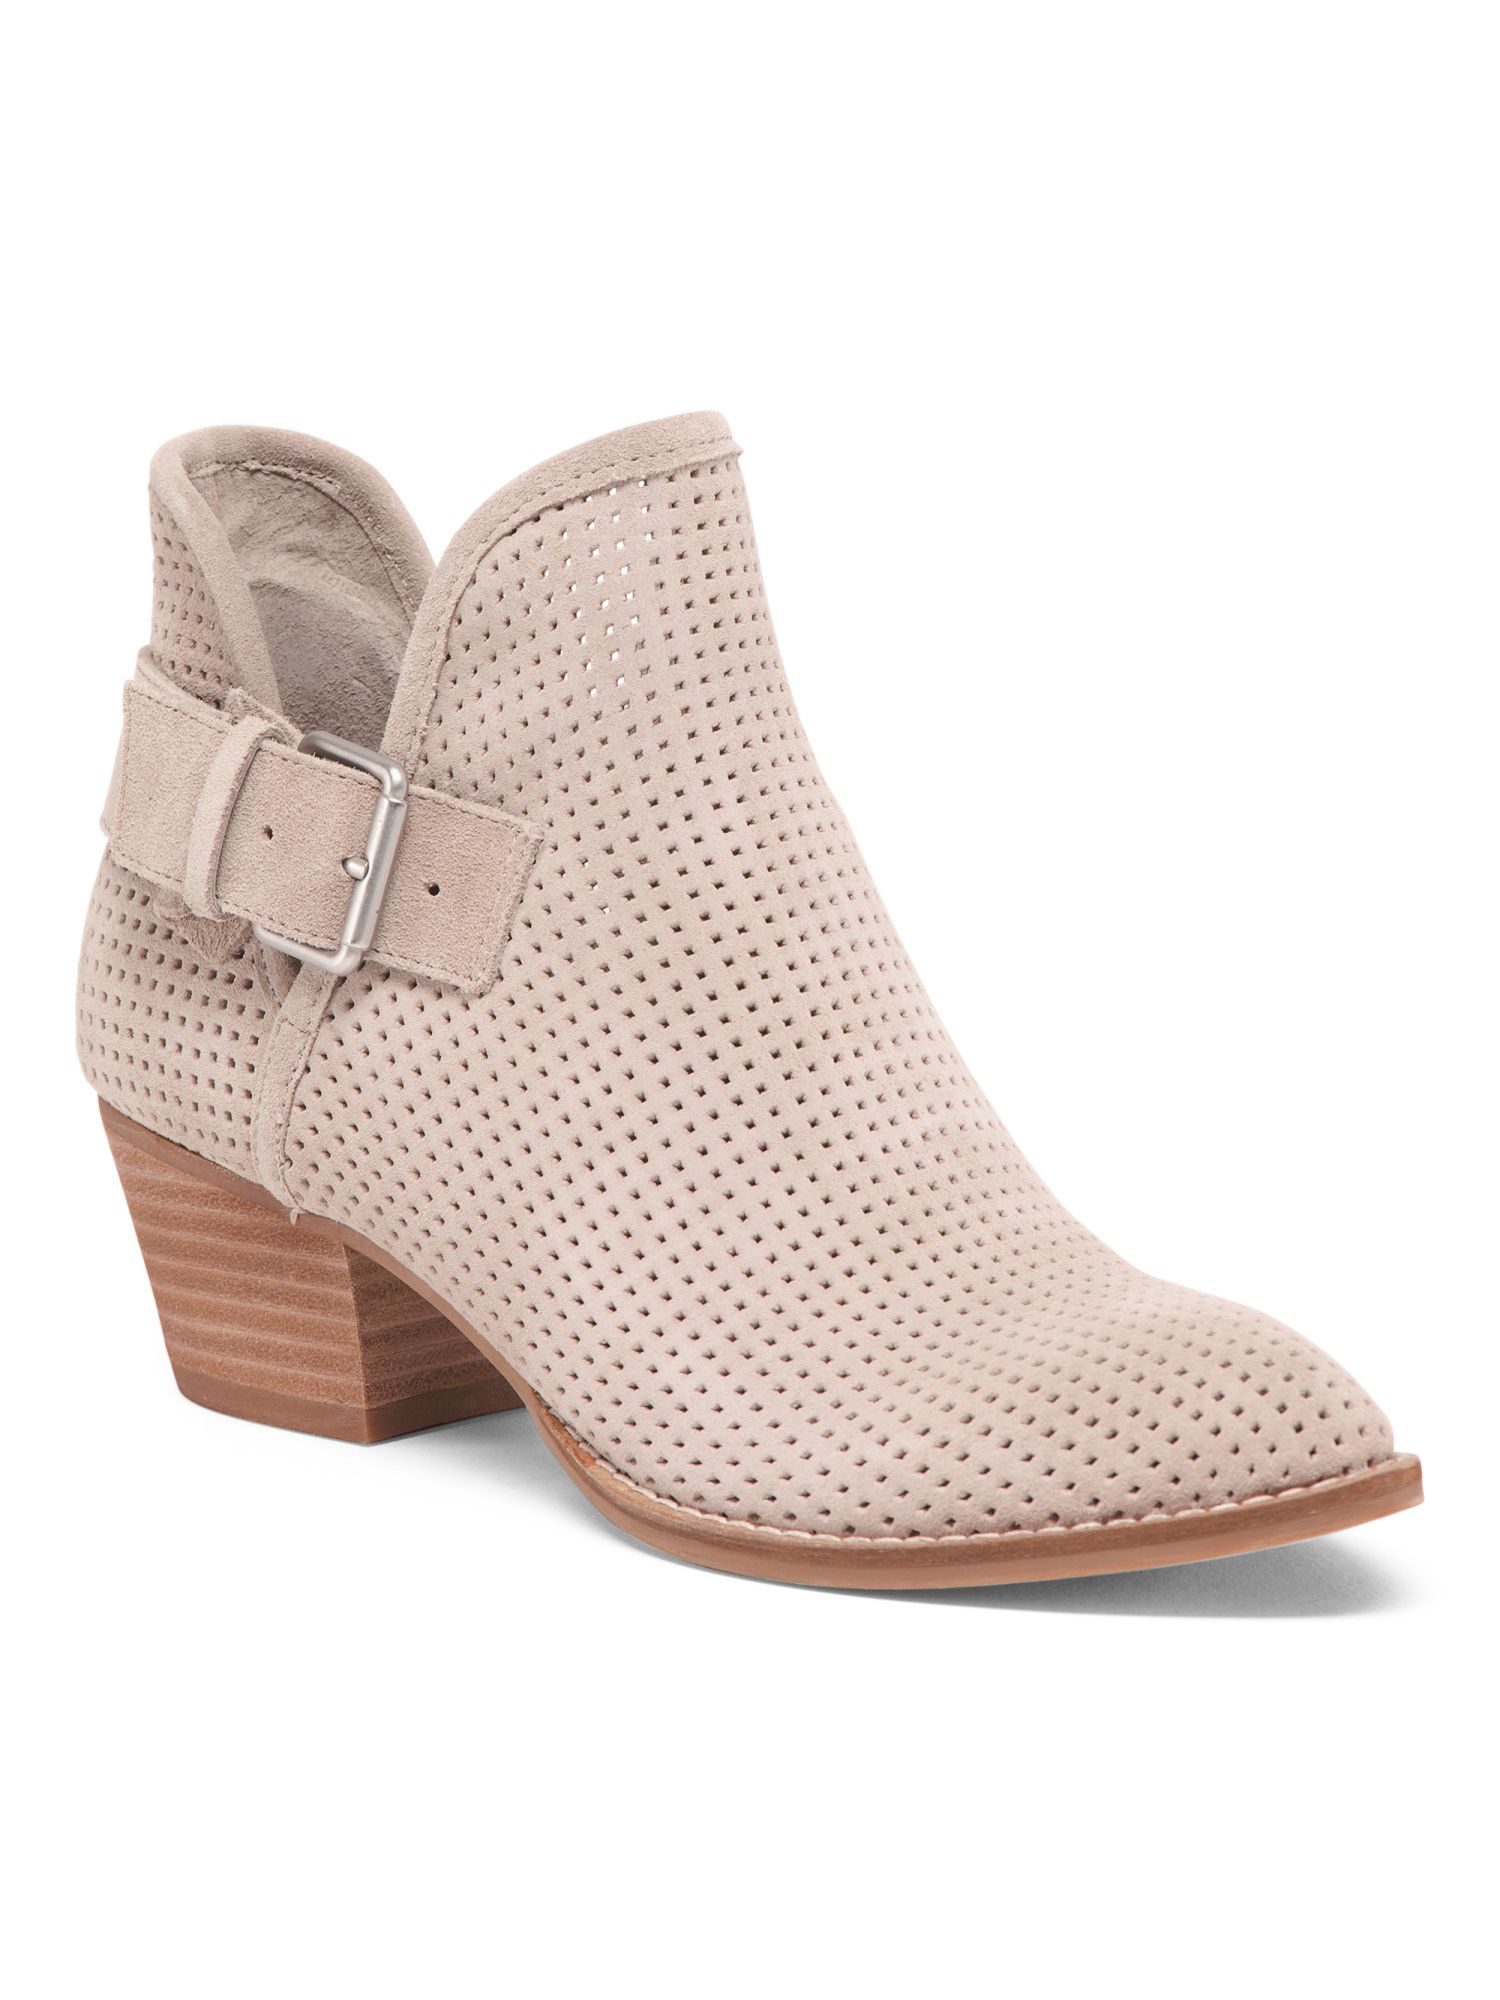 Perforated Suede Stacked Heel Bootie | TJ Maxx